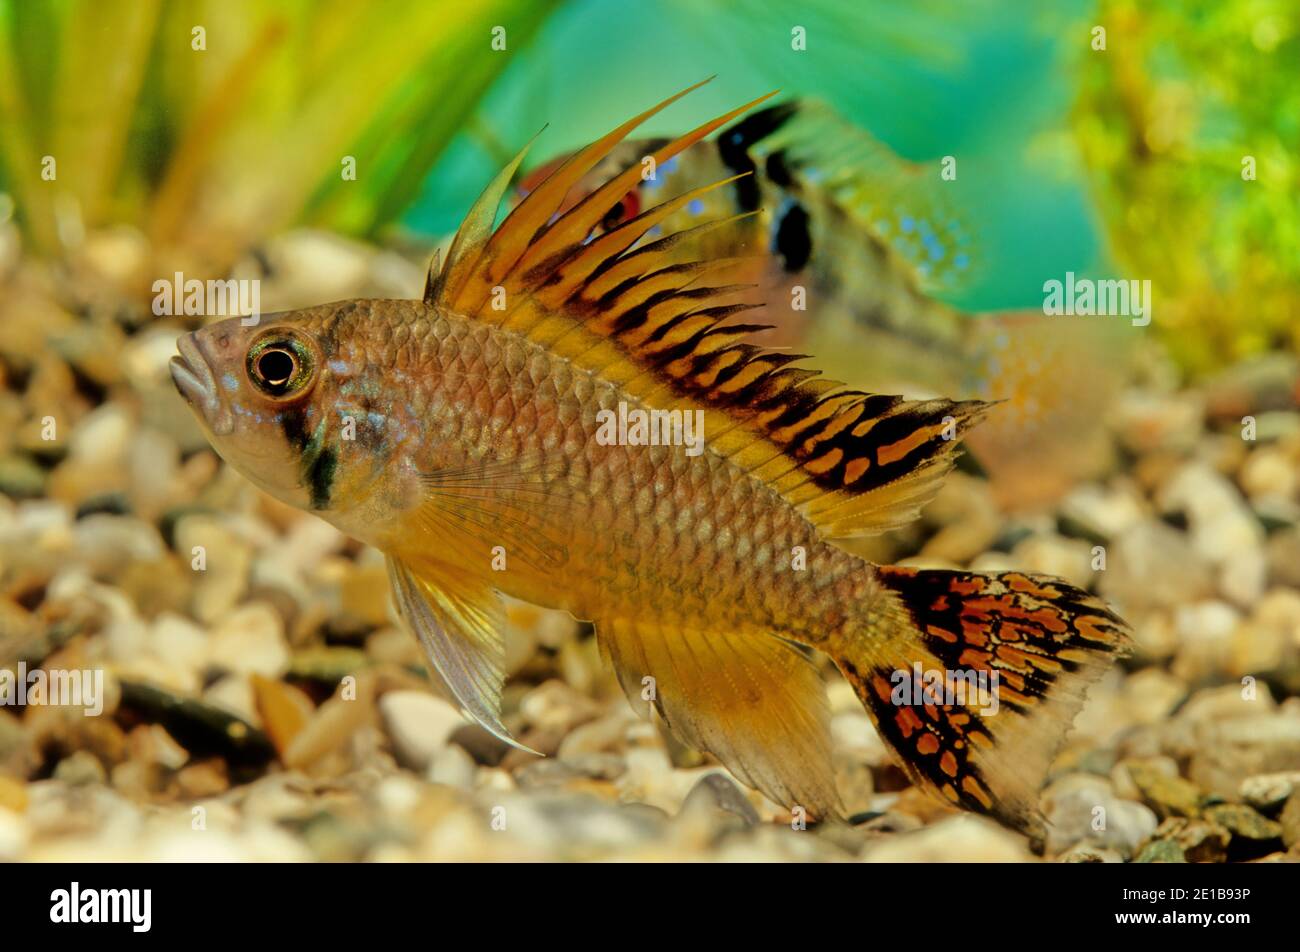 Apistogramma cacatuoides or the cockatoo dwarf cichlid is a South American cichlid and the Apistogramma species most commonly bred in captivity. Stock Photo